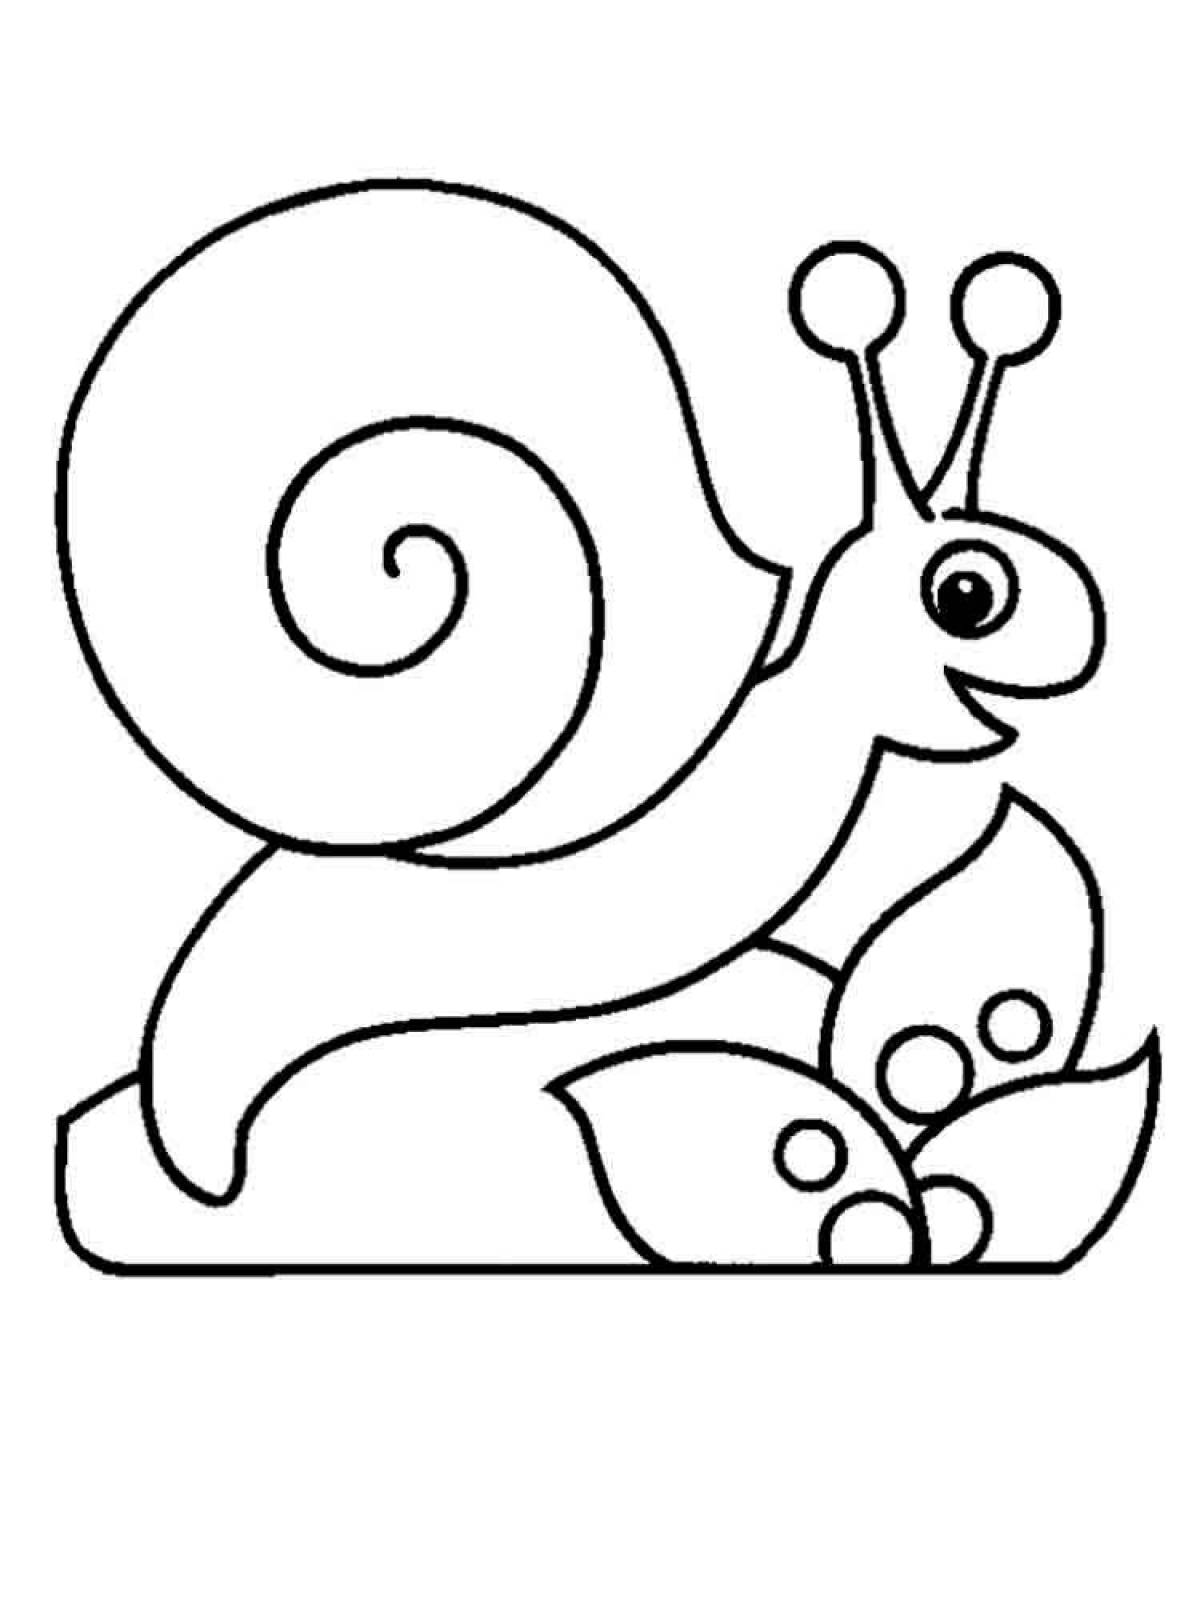 Fantastic snail coloring page for kids